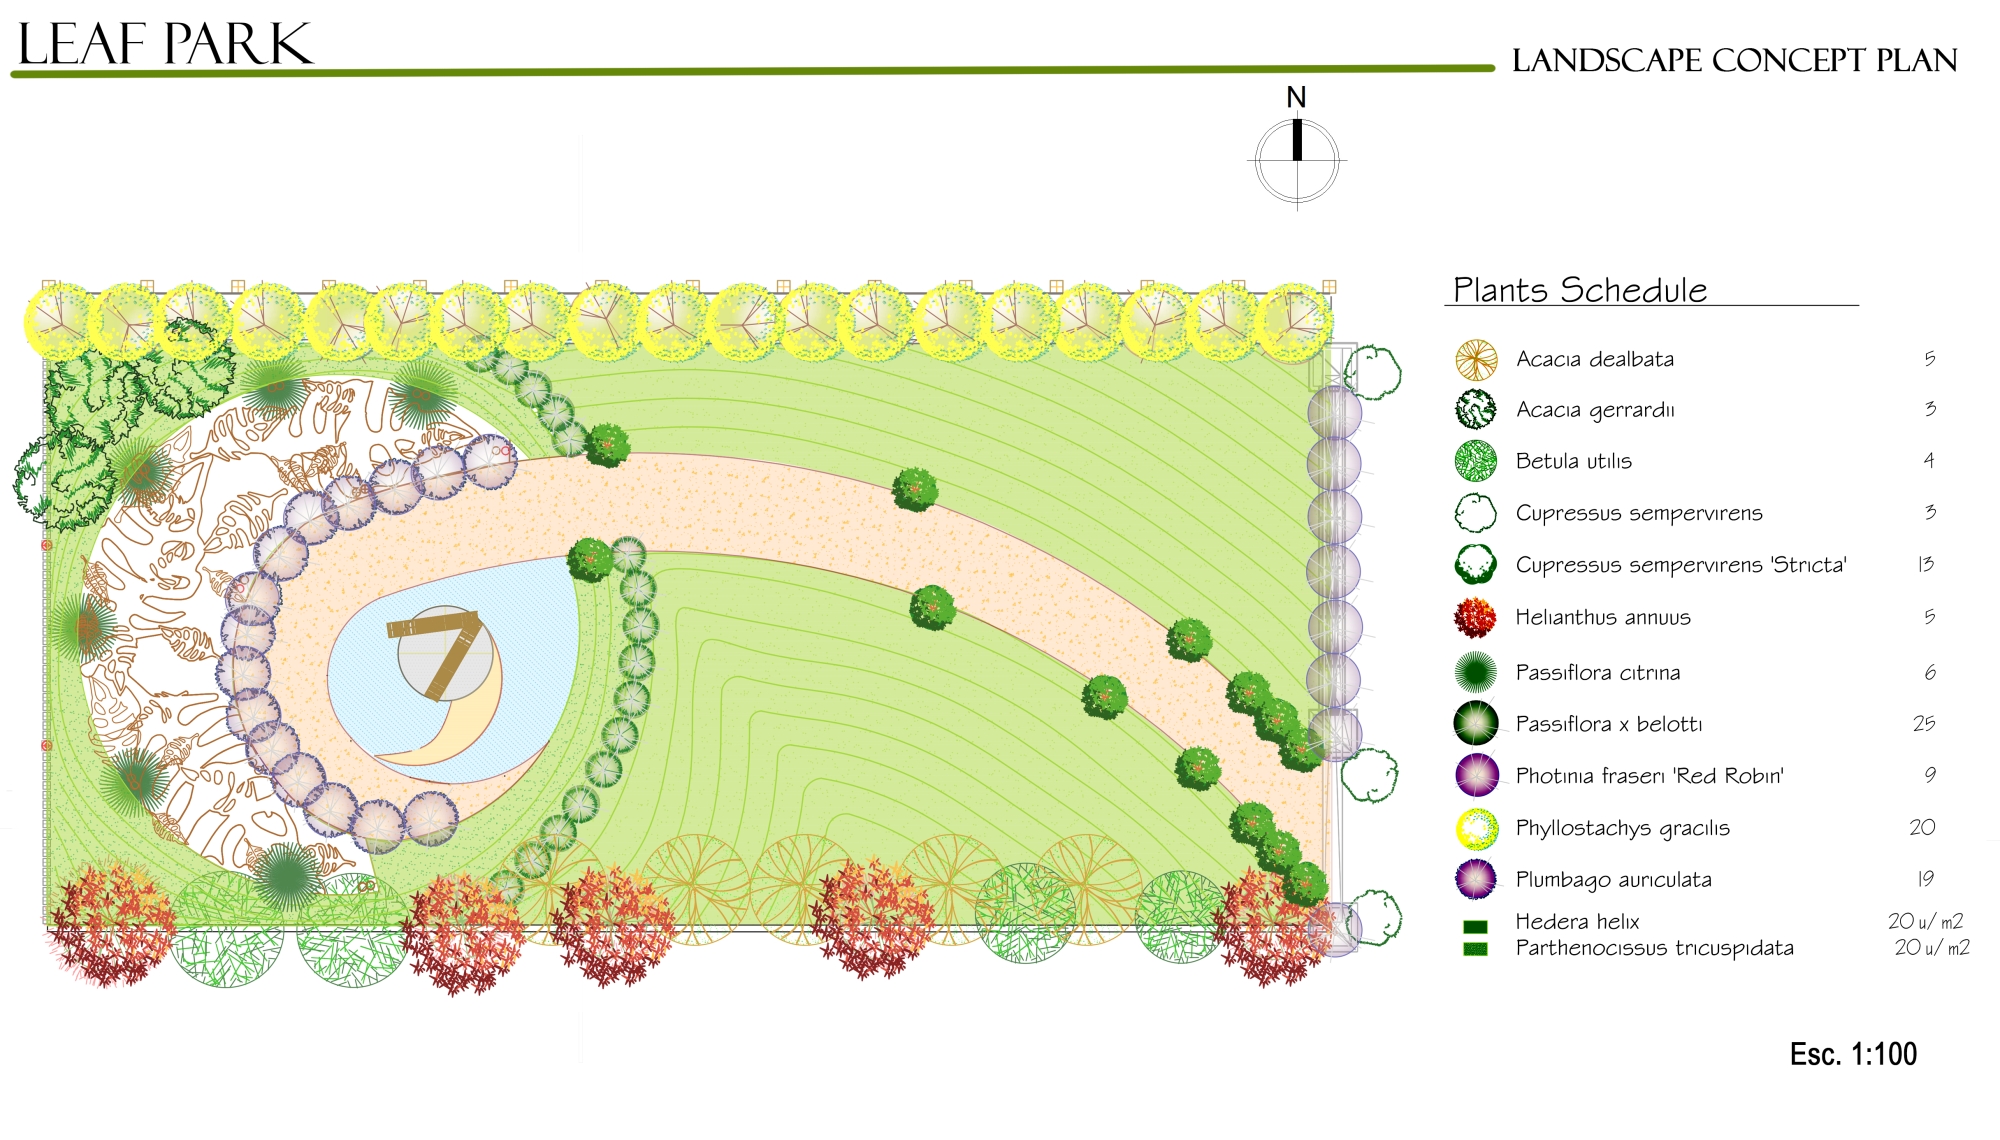 Leaf Park. Plants plan view and schedule.